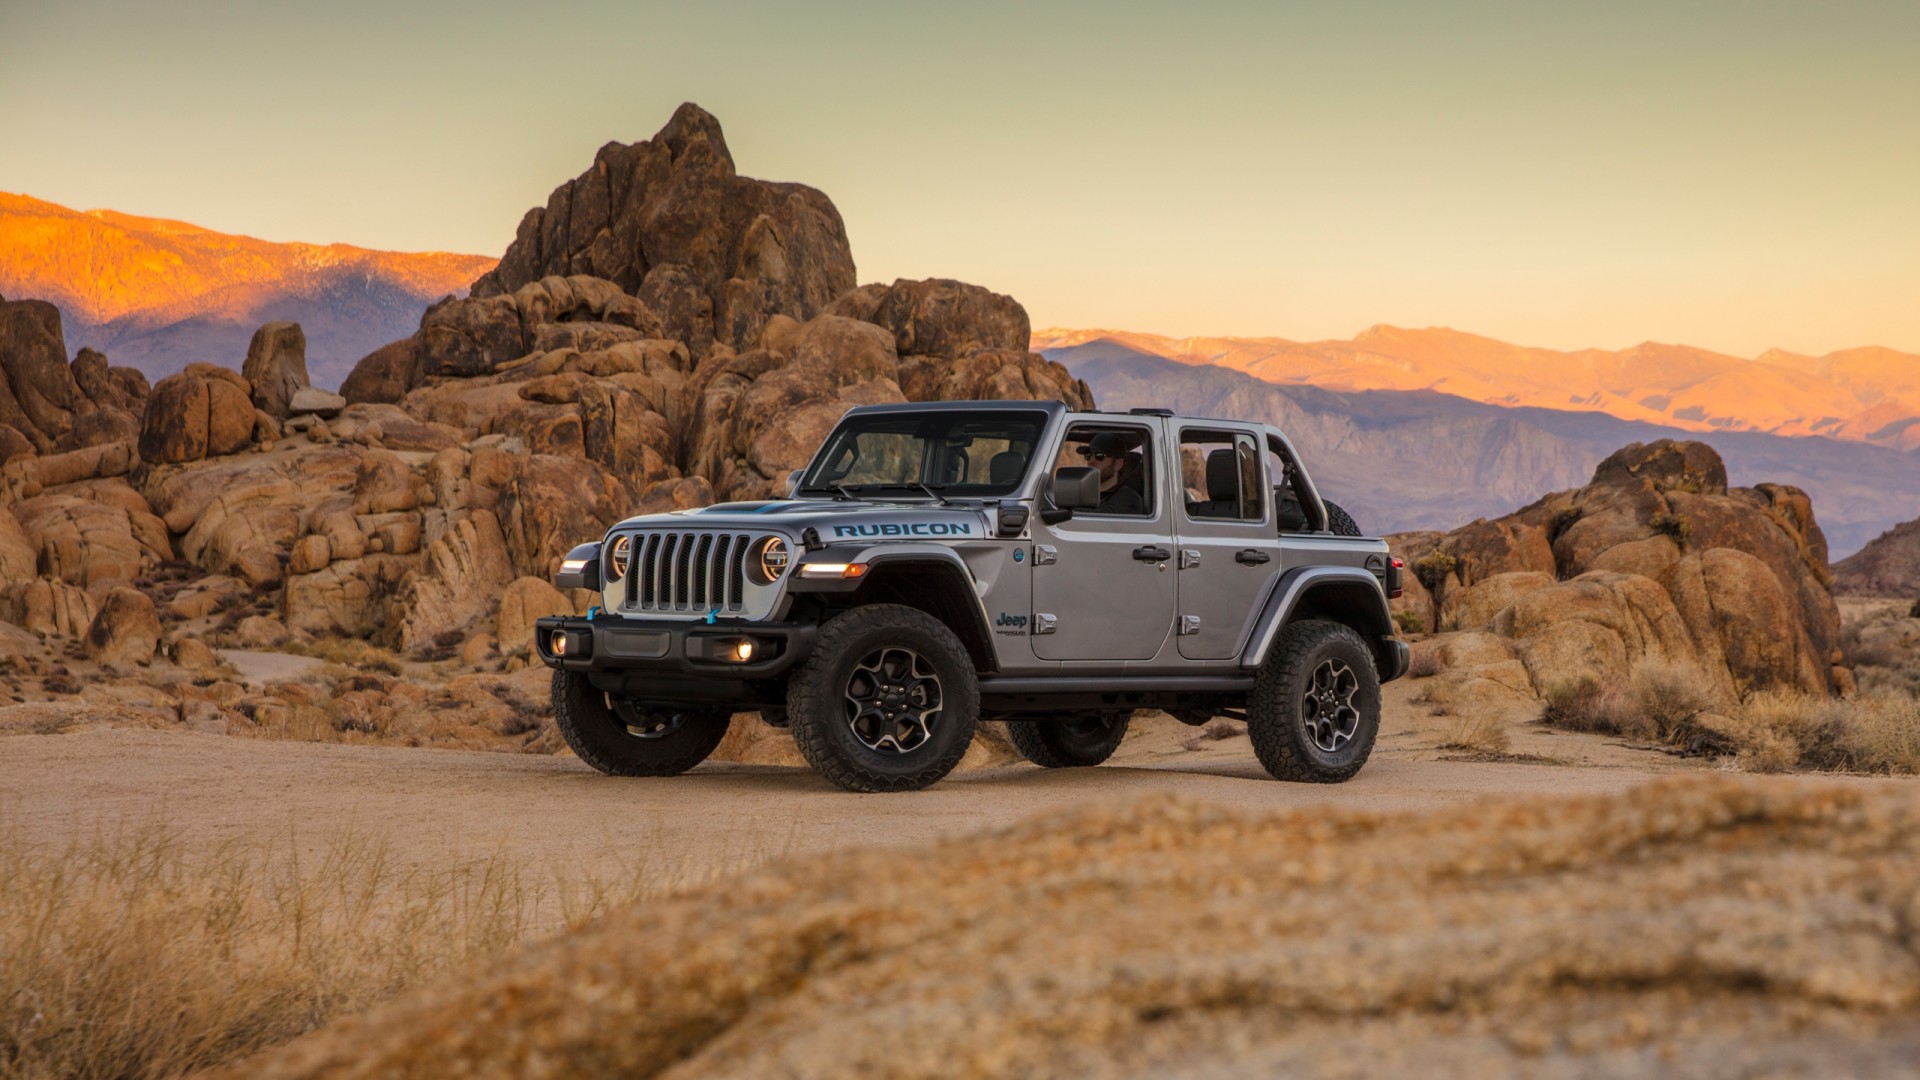 2021 Jeep Wrangler Unlimited Rubicon 4xe Wallpaper | HD Car Wallpapers